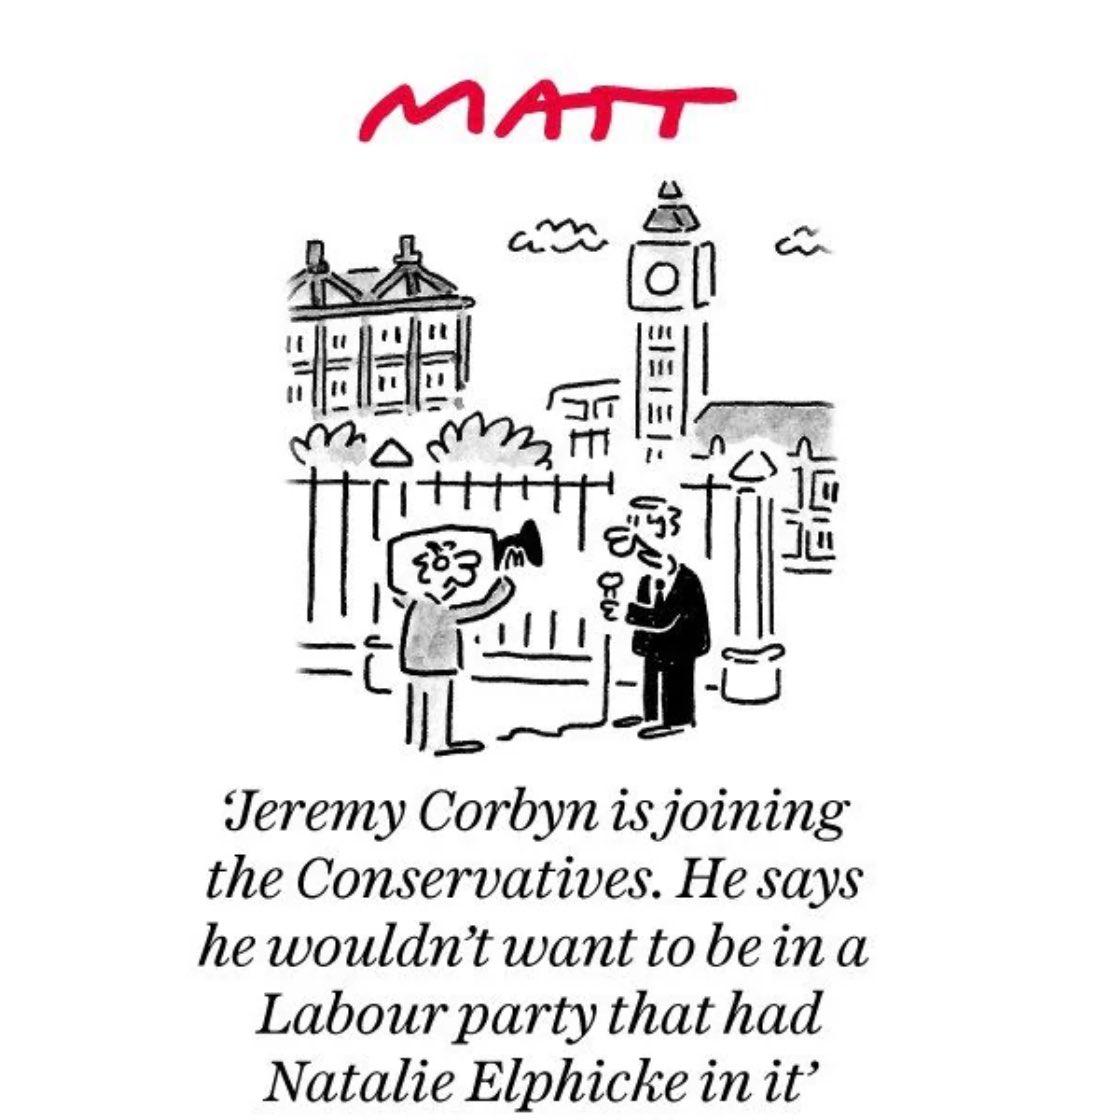 Check out the newest #Matt cartoon exclusively from The Daily Telegraph, offering a sneak peek into #TomorrowsPapersToday. “Jeremy Corbyn is joining the Conservatives. He says he wouldn't want to be in a Labour party that had Natalie Elphicke in it”